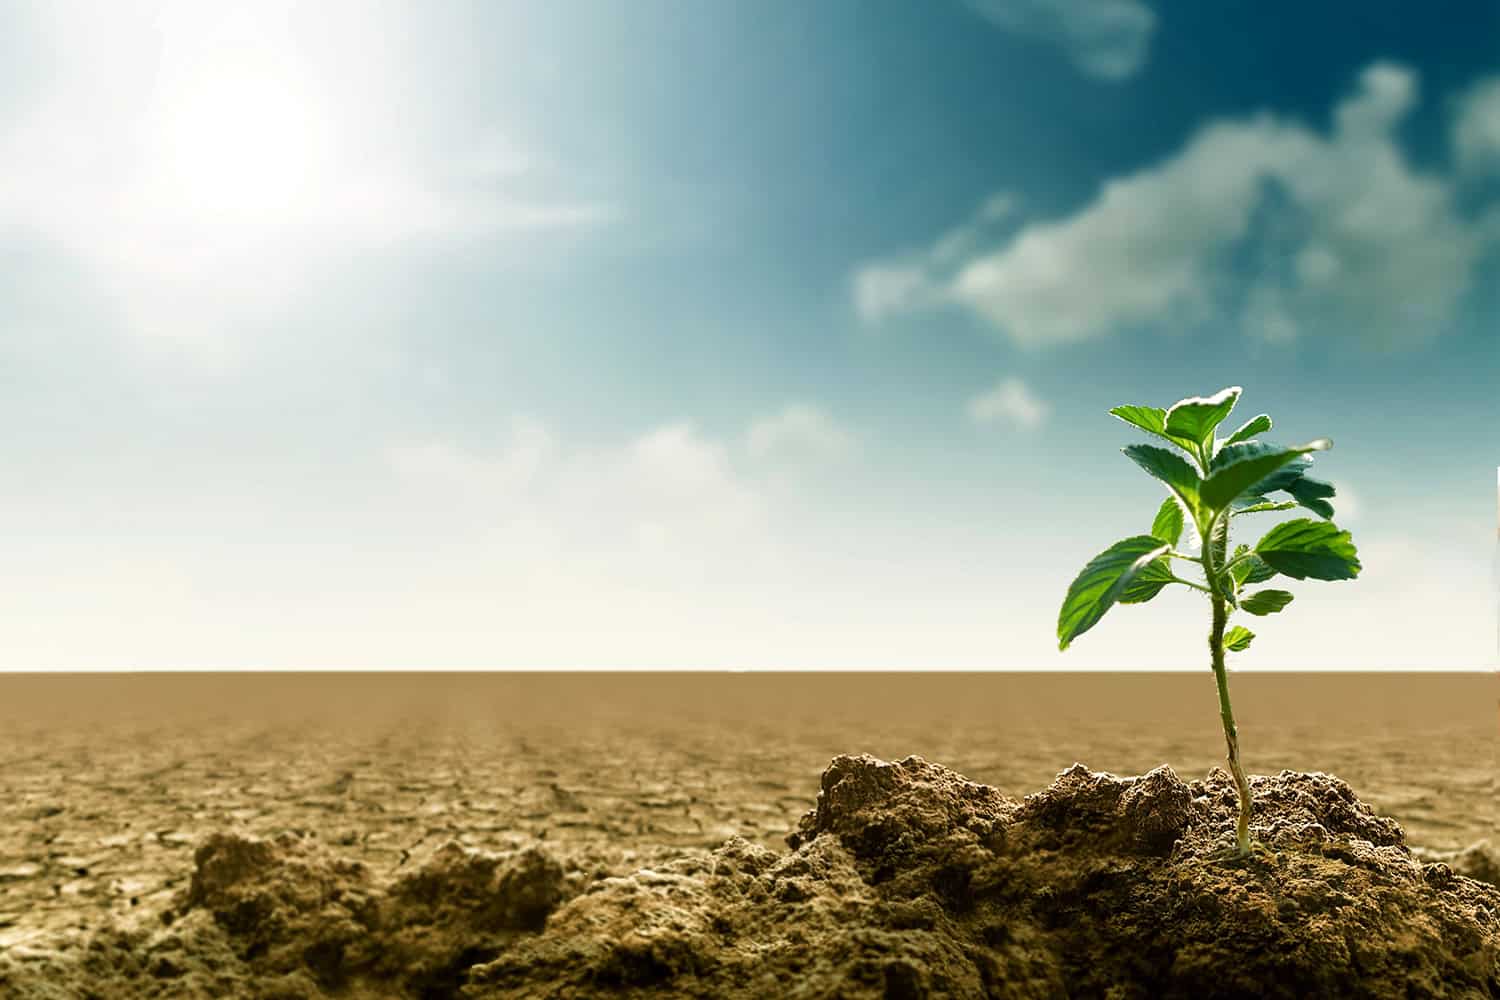 A small green plant with several leaves grows on a mound of soil in an otherwise barren, cracked earth landscape under a partly cloudy sky with the sun shining brightly.